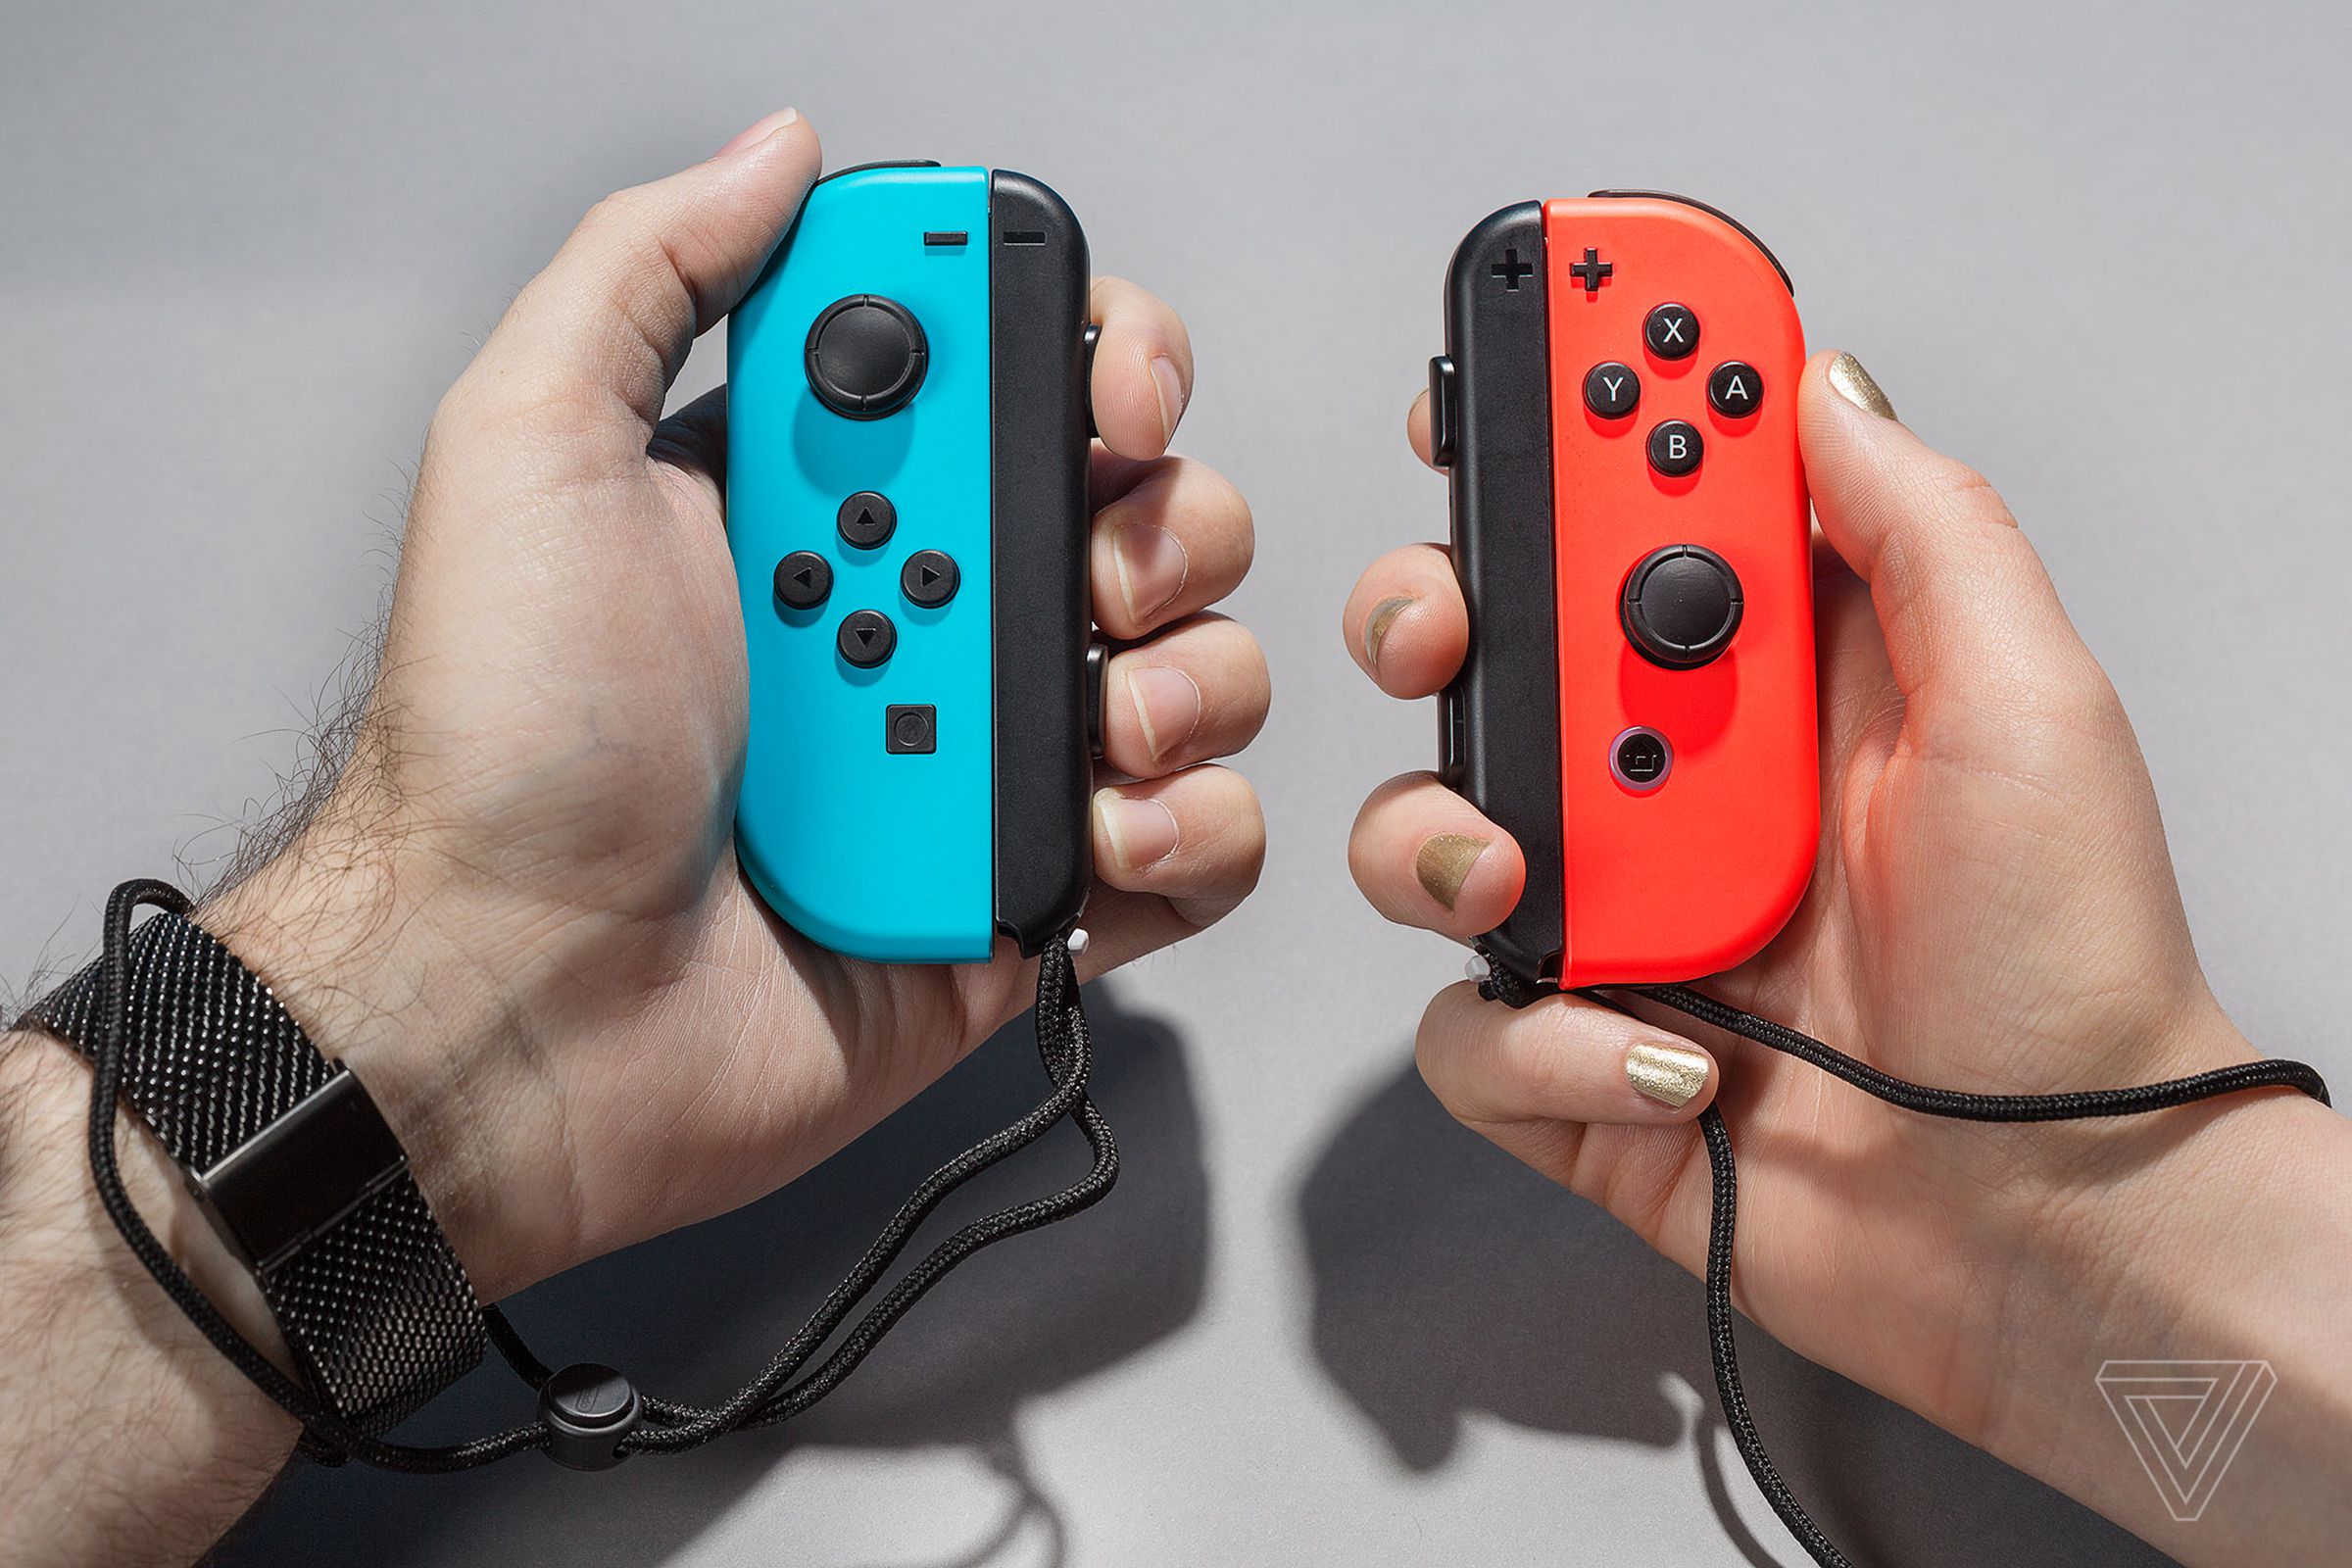 An image showing someone holding blue and red Joy-Cons in their hands